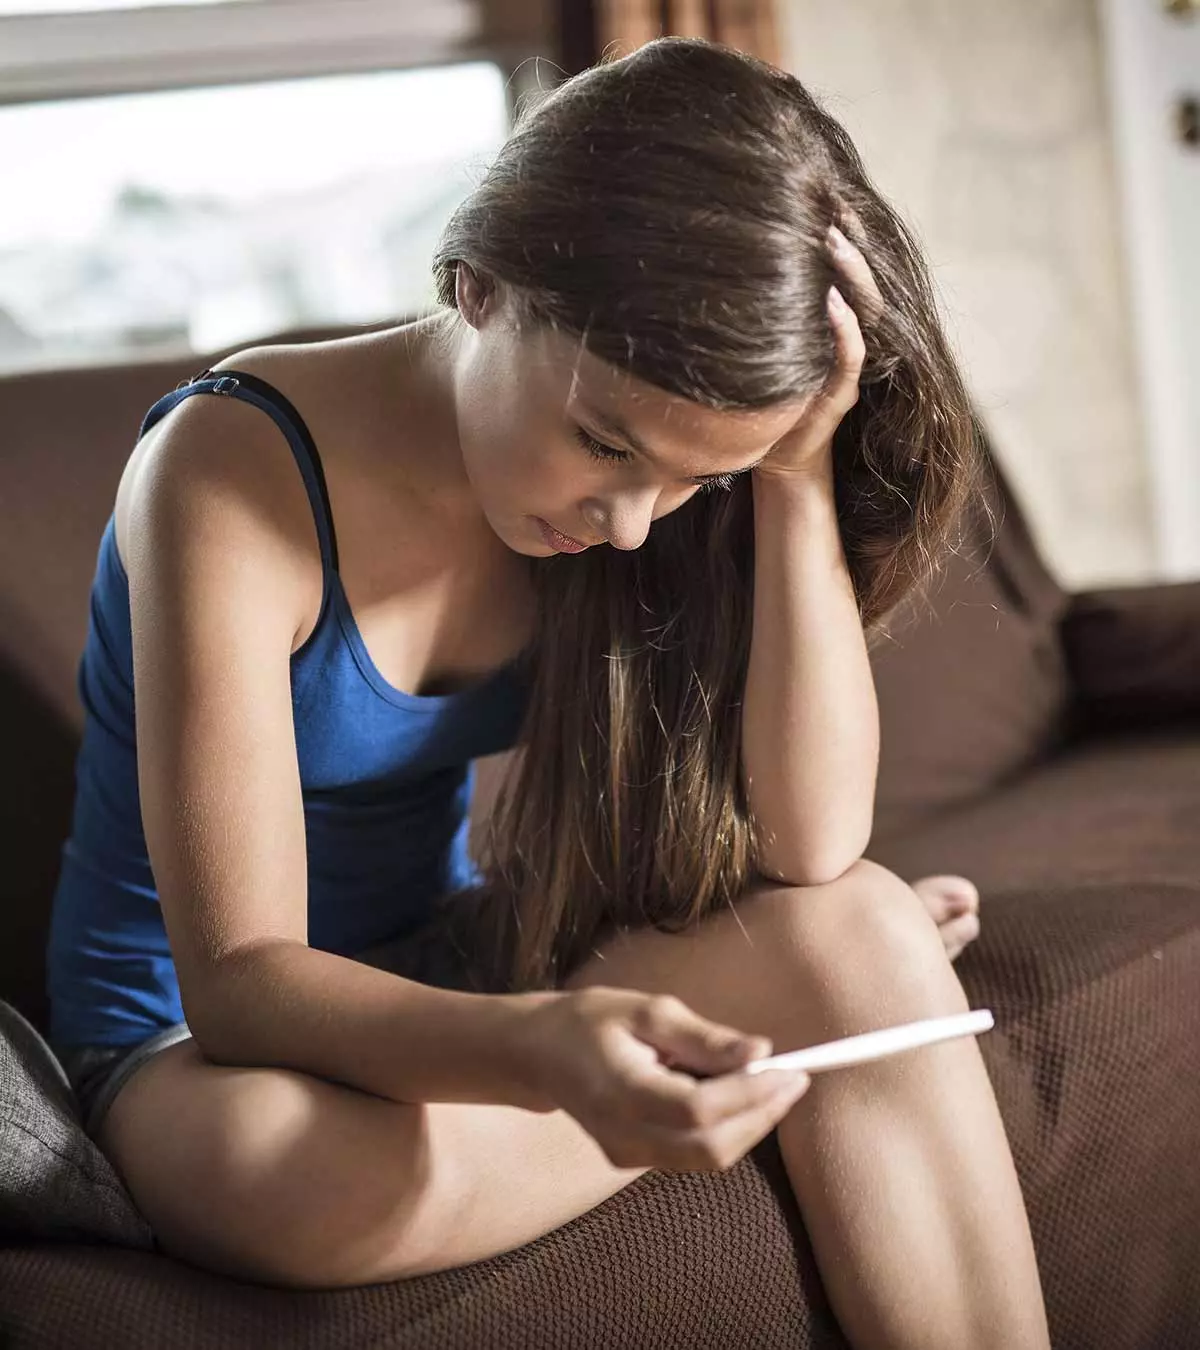 Abortion In Teenagers Reasons, Legal Aspects And Rights